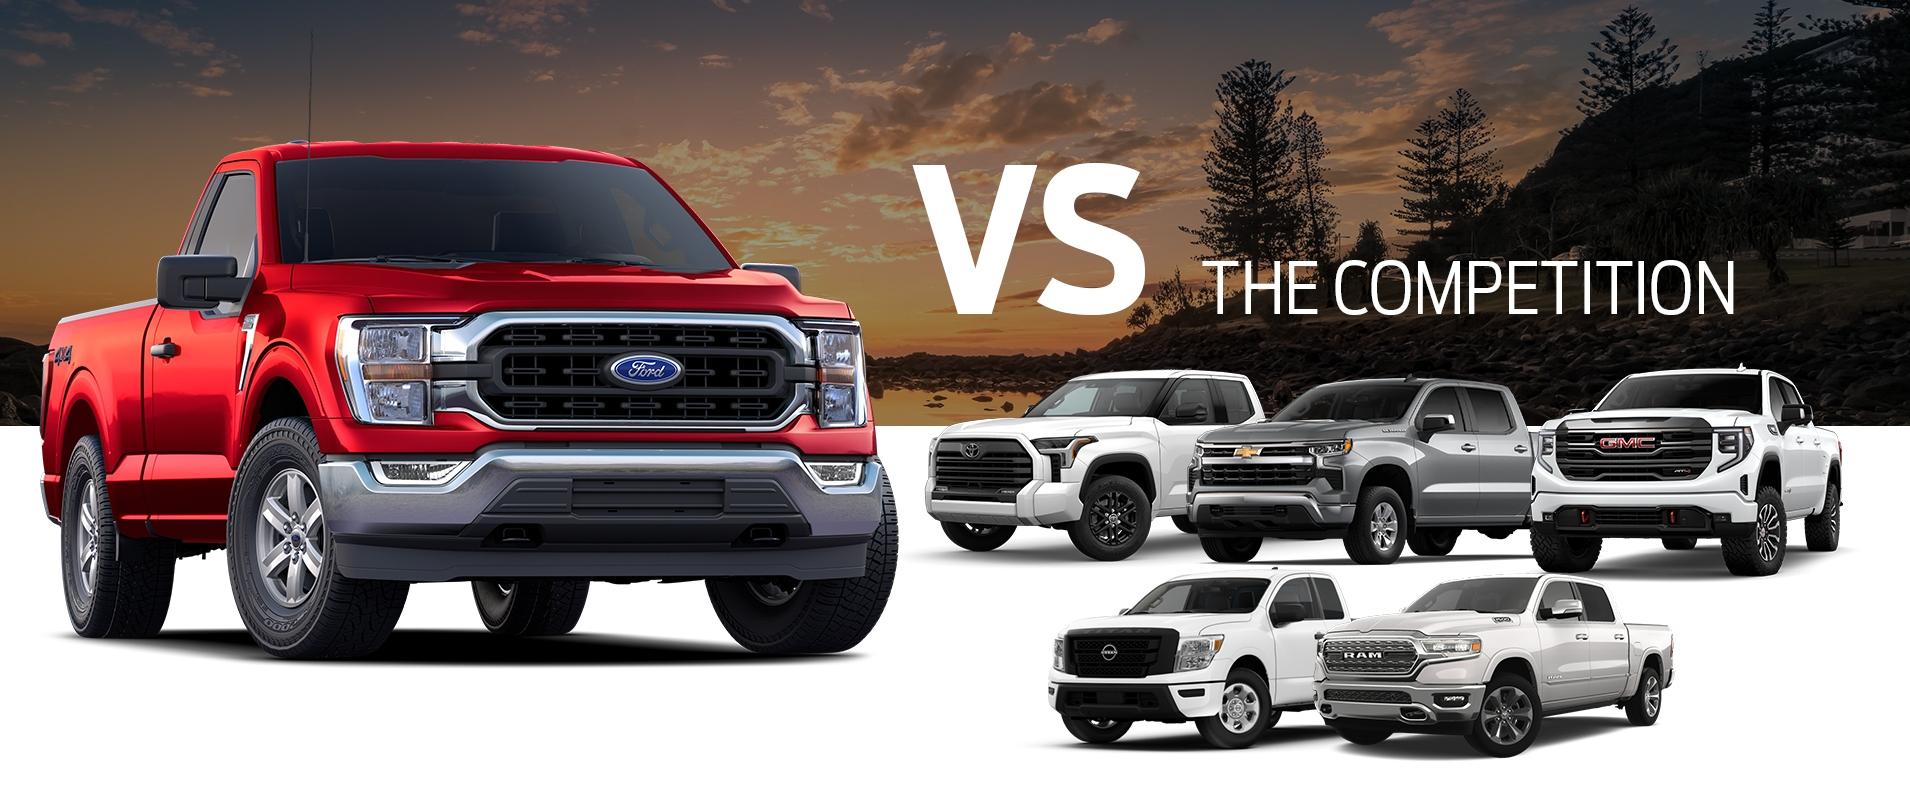 F-150 vs Competition